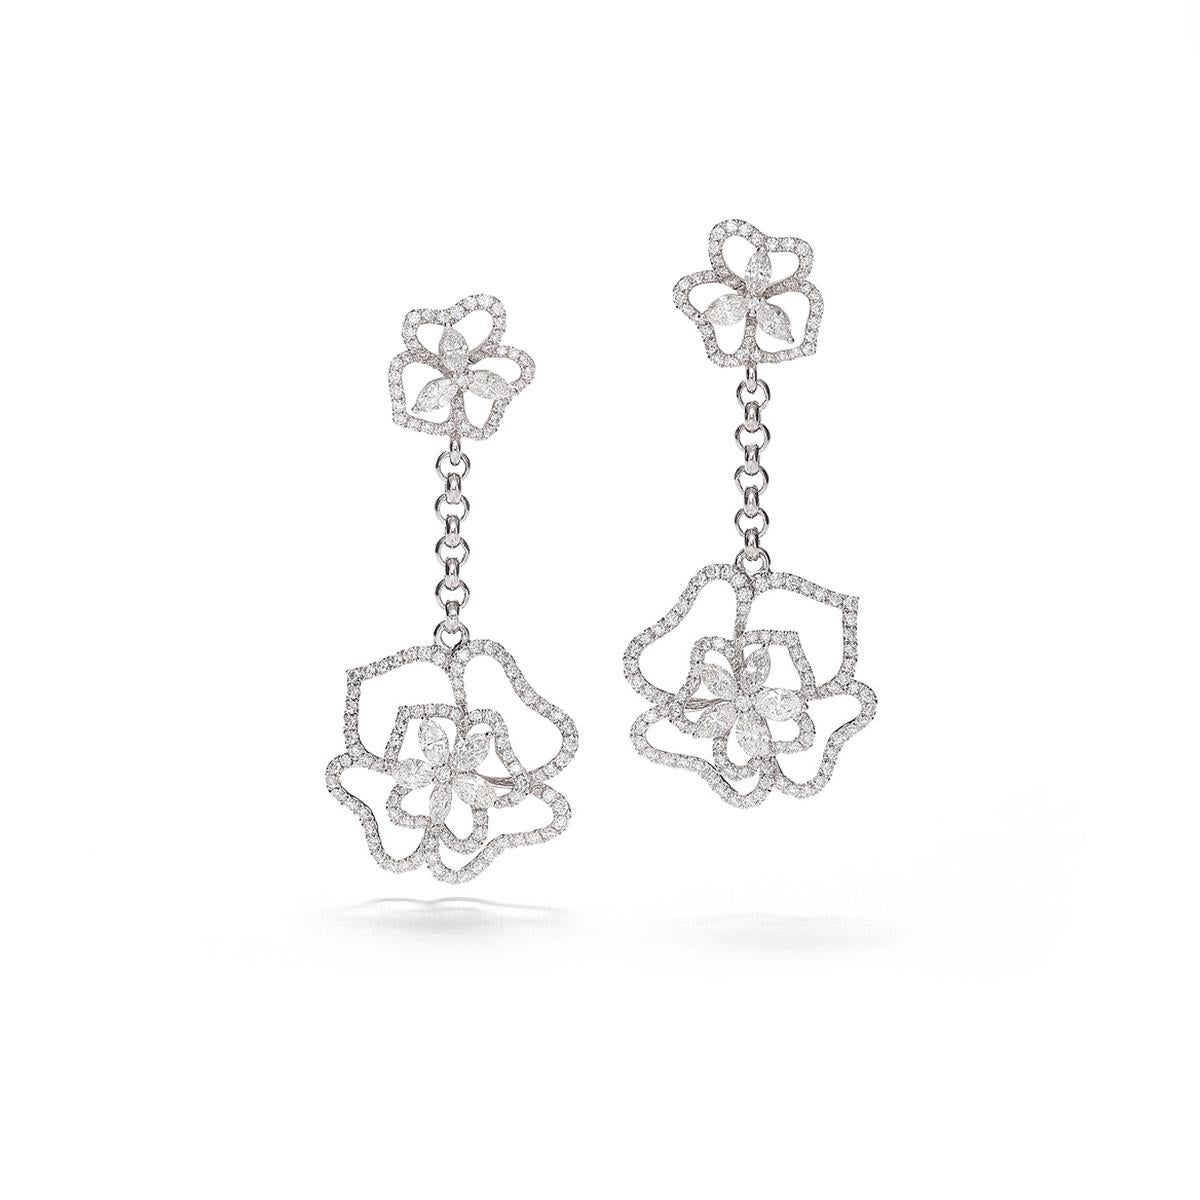 Earrings in 18kt white gold Flower set with 276 diamonds 2.06 cts and 16 marquise cut diamonds 2.03 cts 